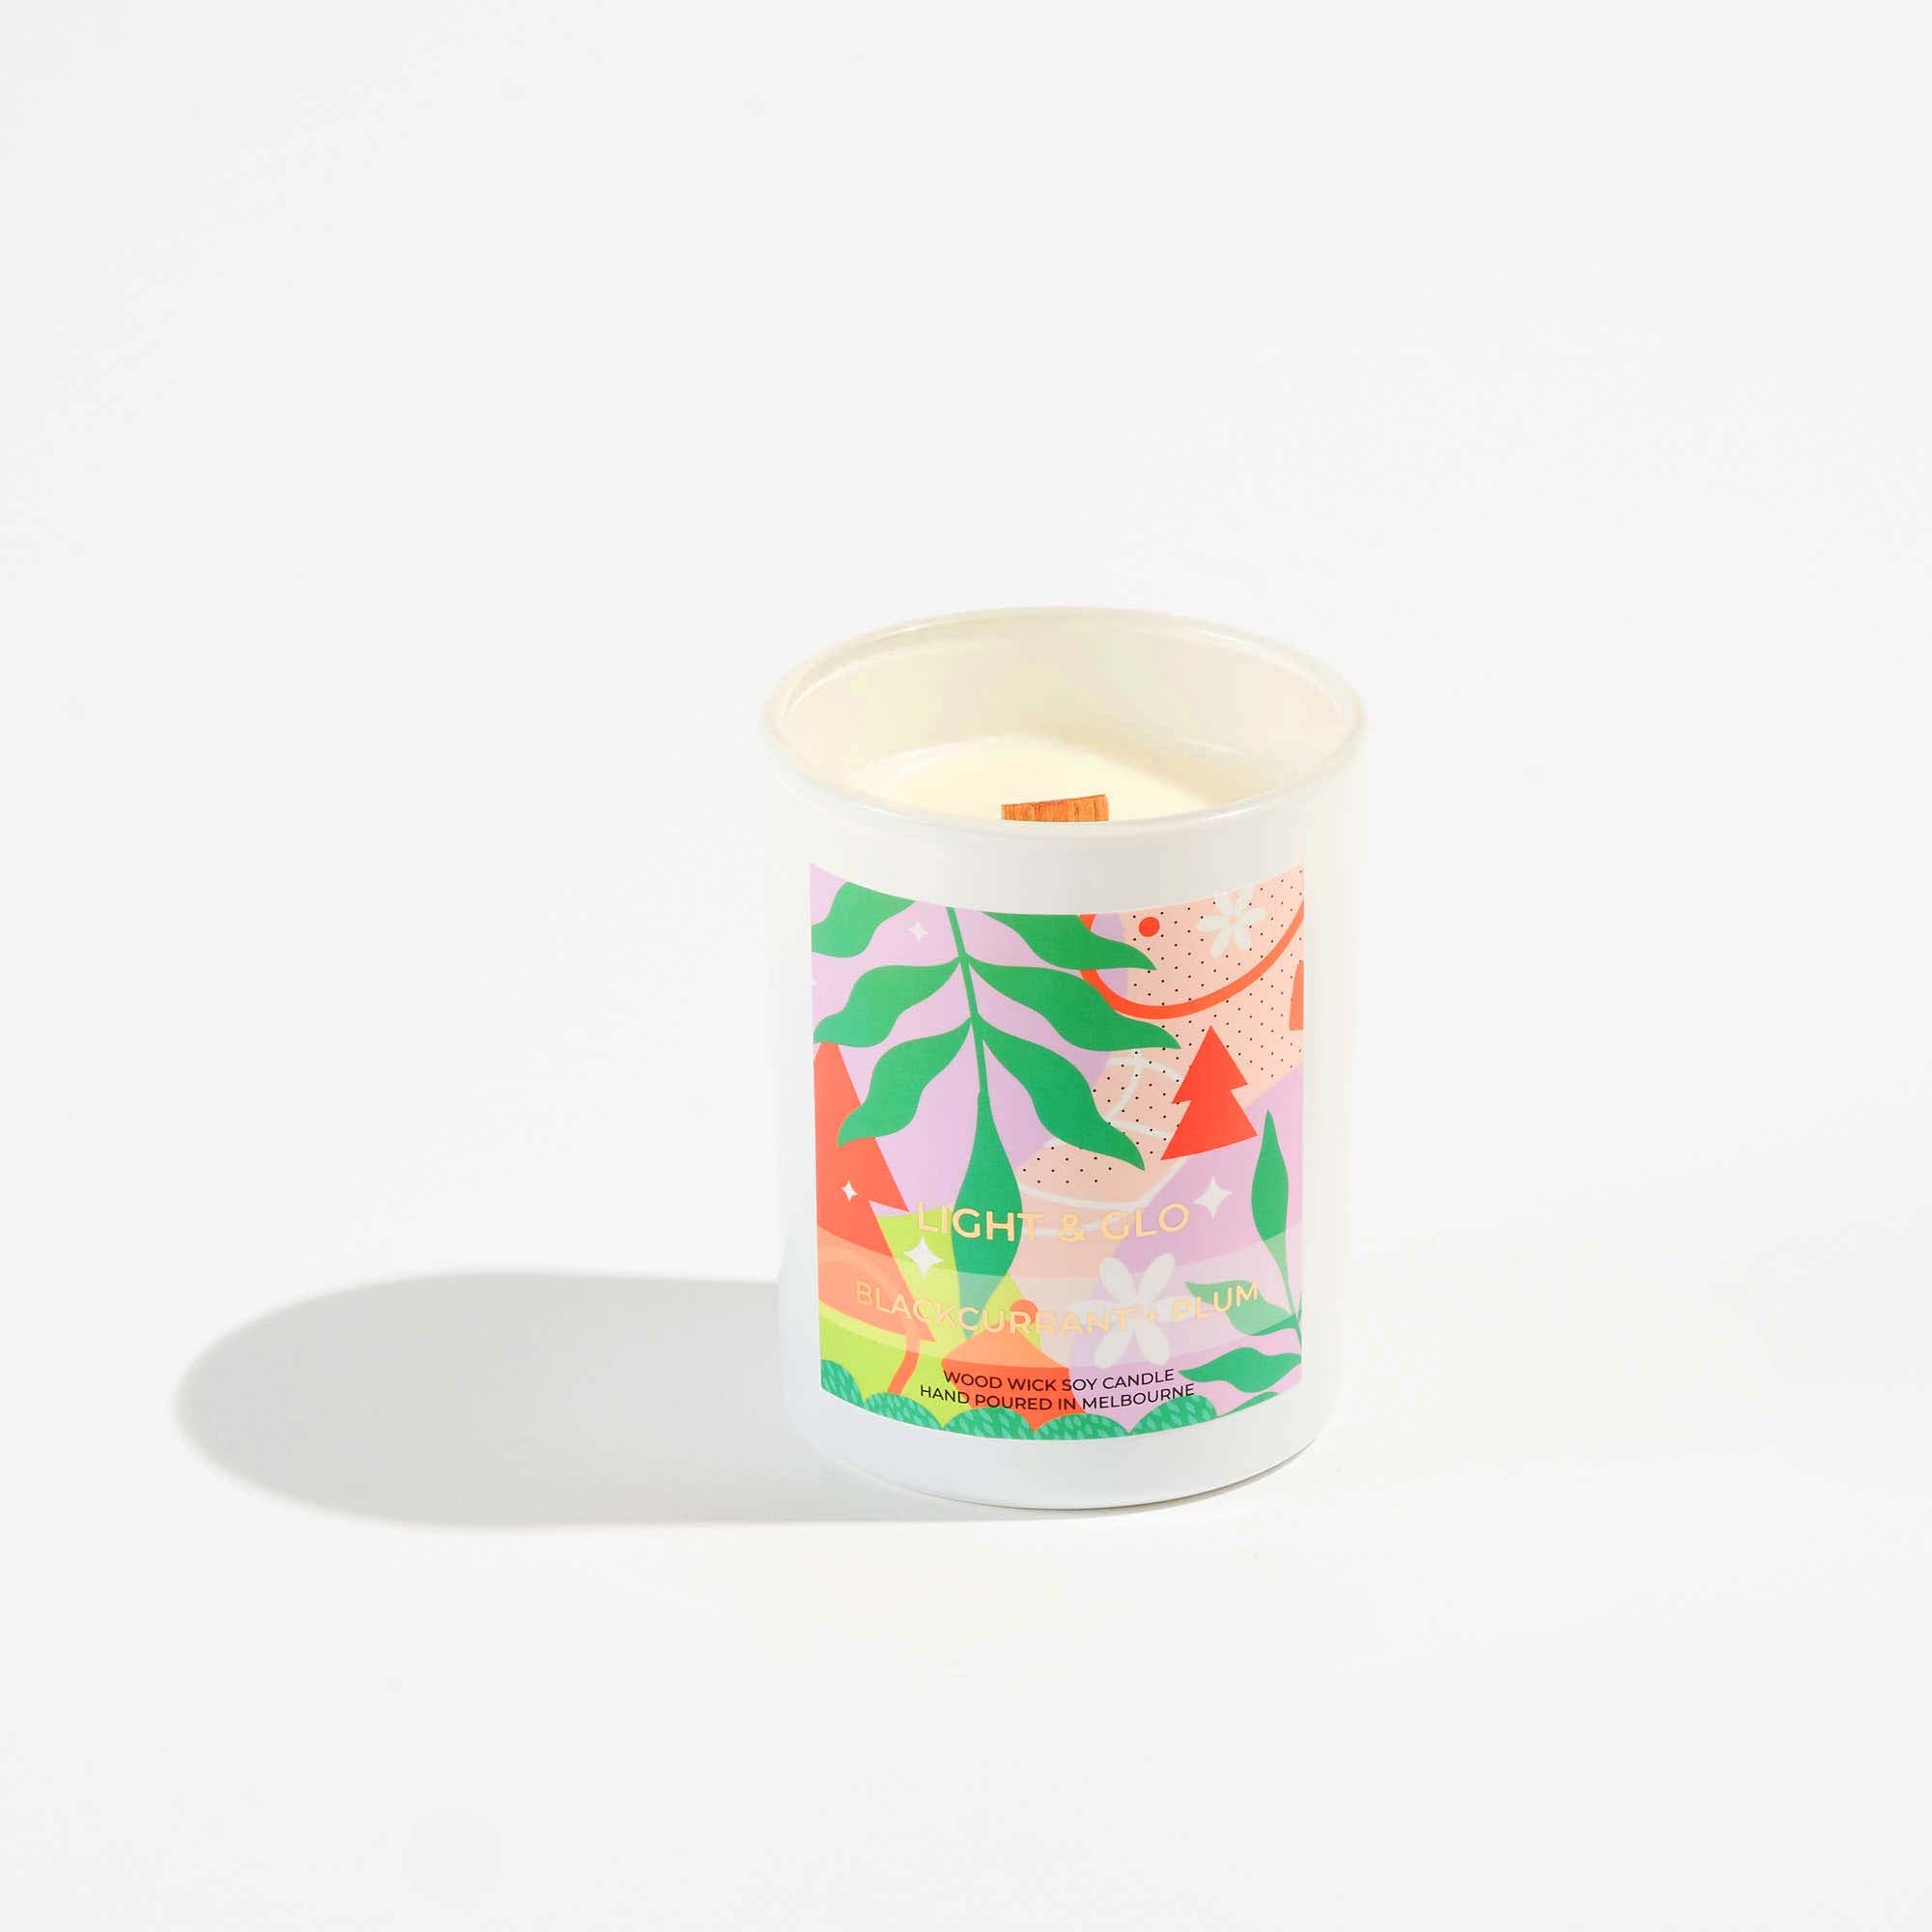 Christmas Candle - Black Currant & Plum | Luxury Candles & Home Fragrances by Light + Glo